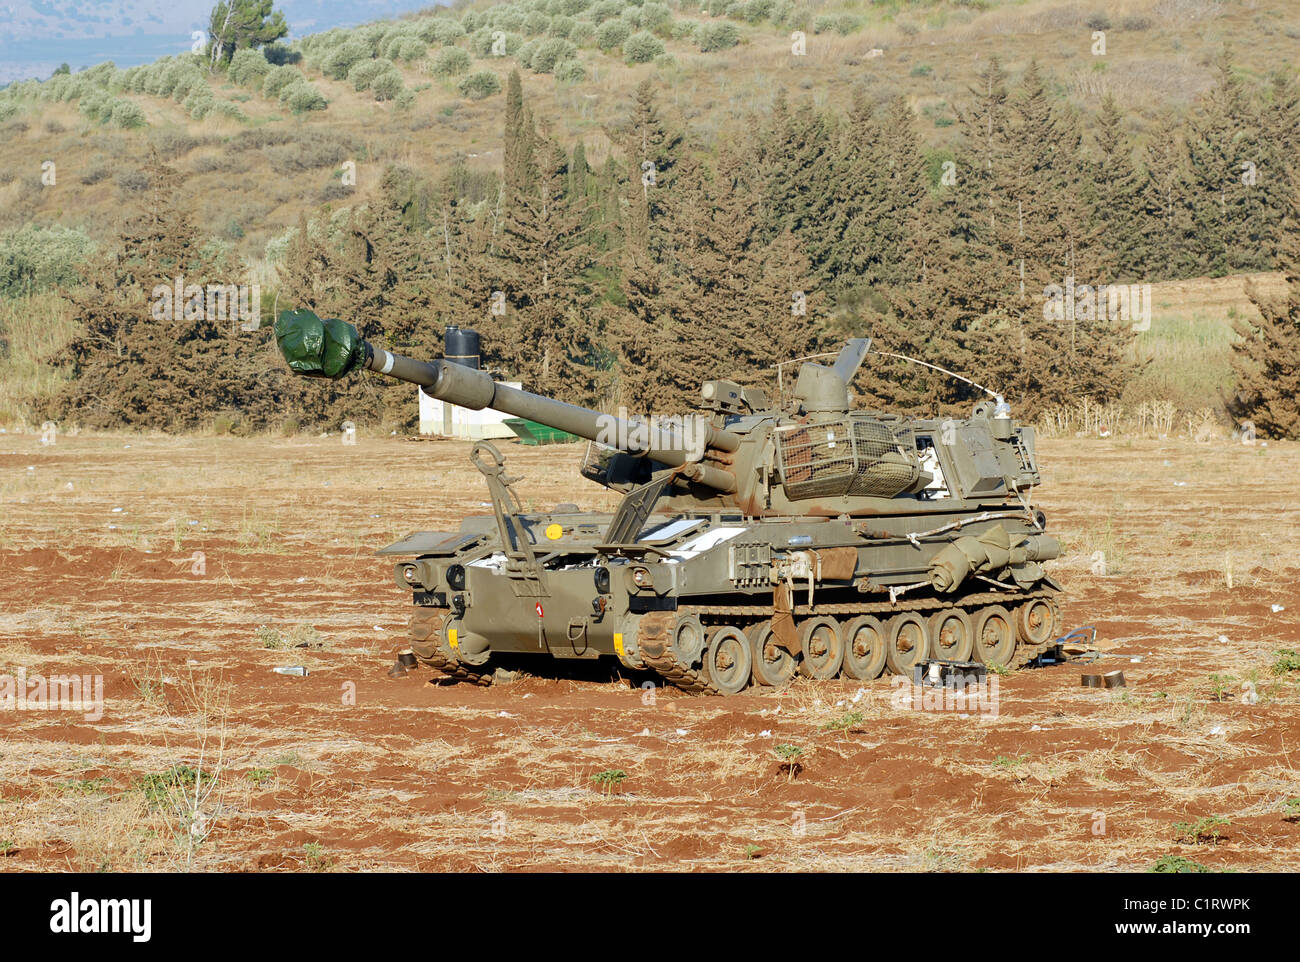 An M109 self-propelled howitzer of the Israel Defense Forces. Stock Photo